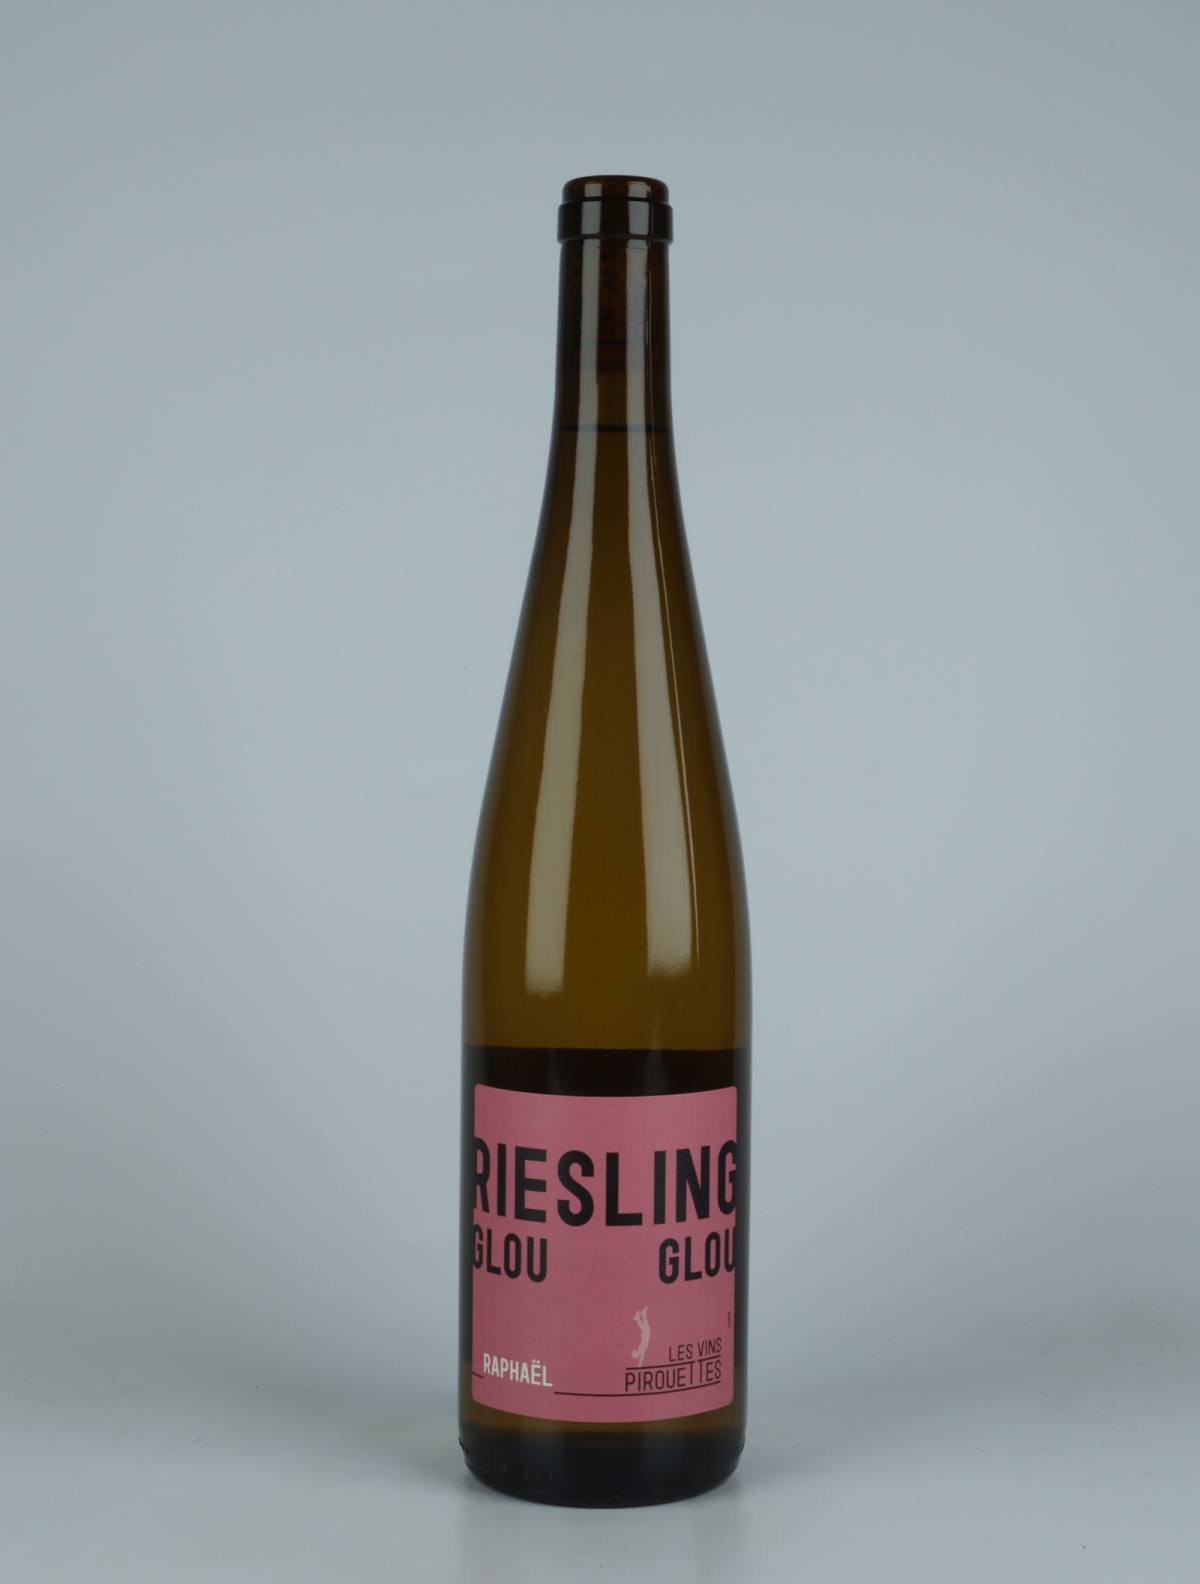 A bottle 2018 Riesling Glou Glou de Raphaël White wine from Les Vins Pirouettes, Alsace in France